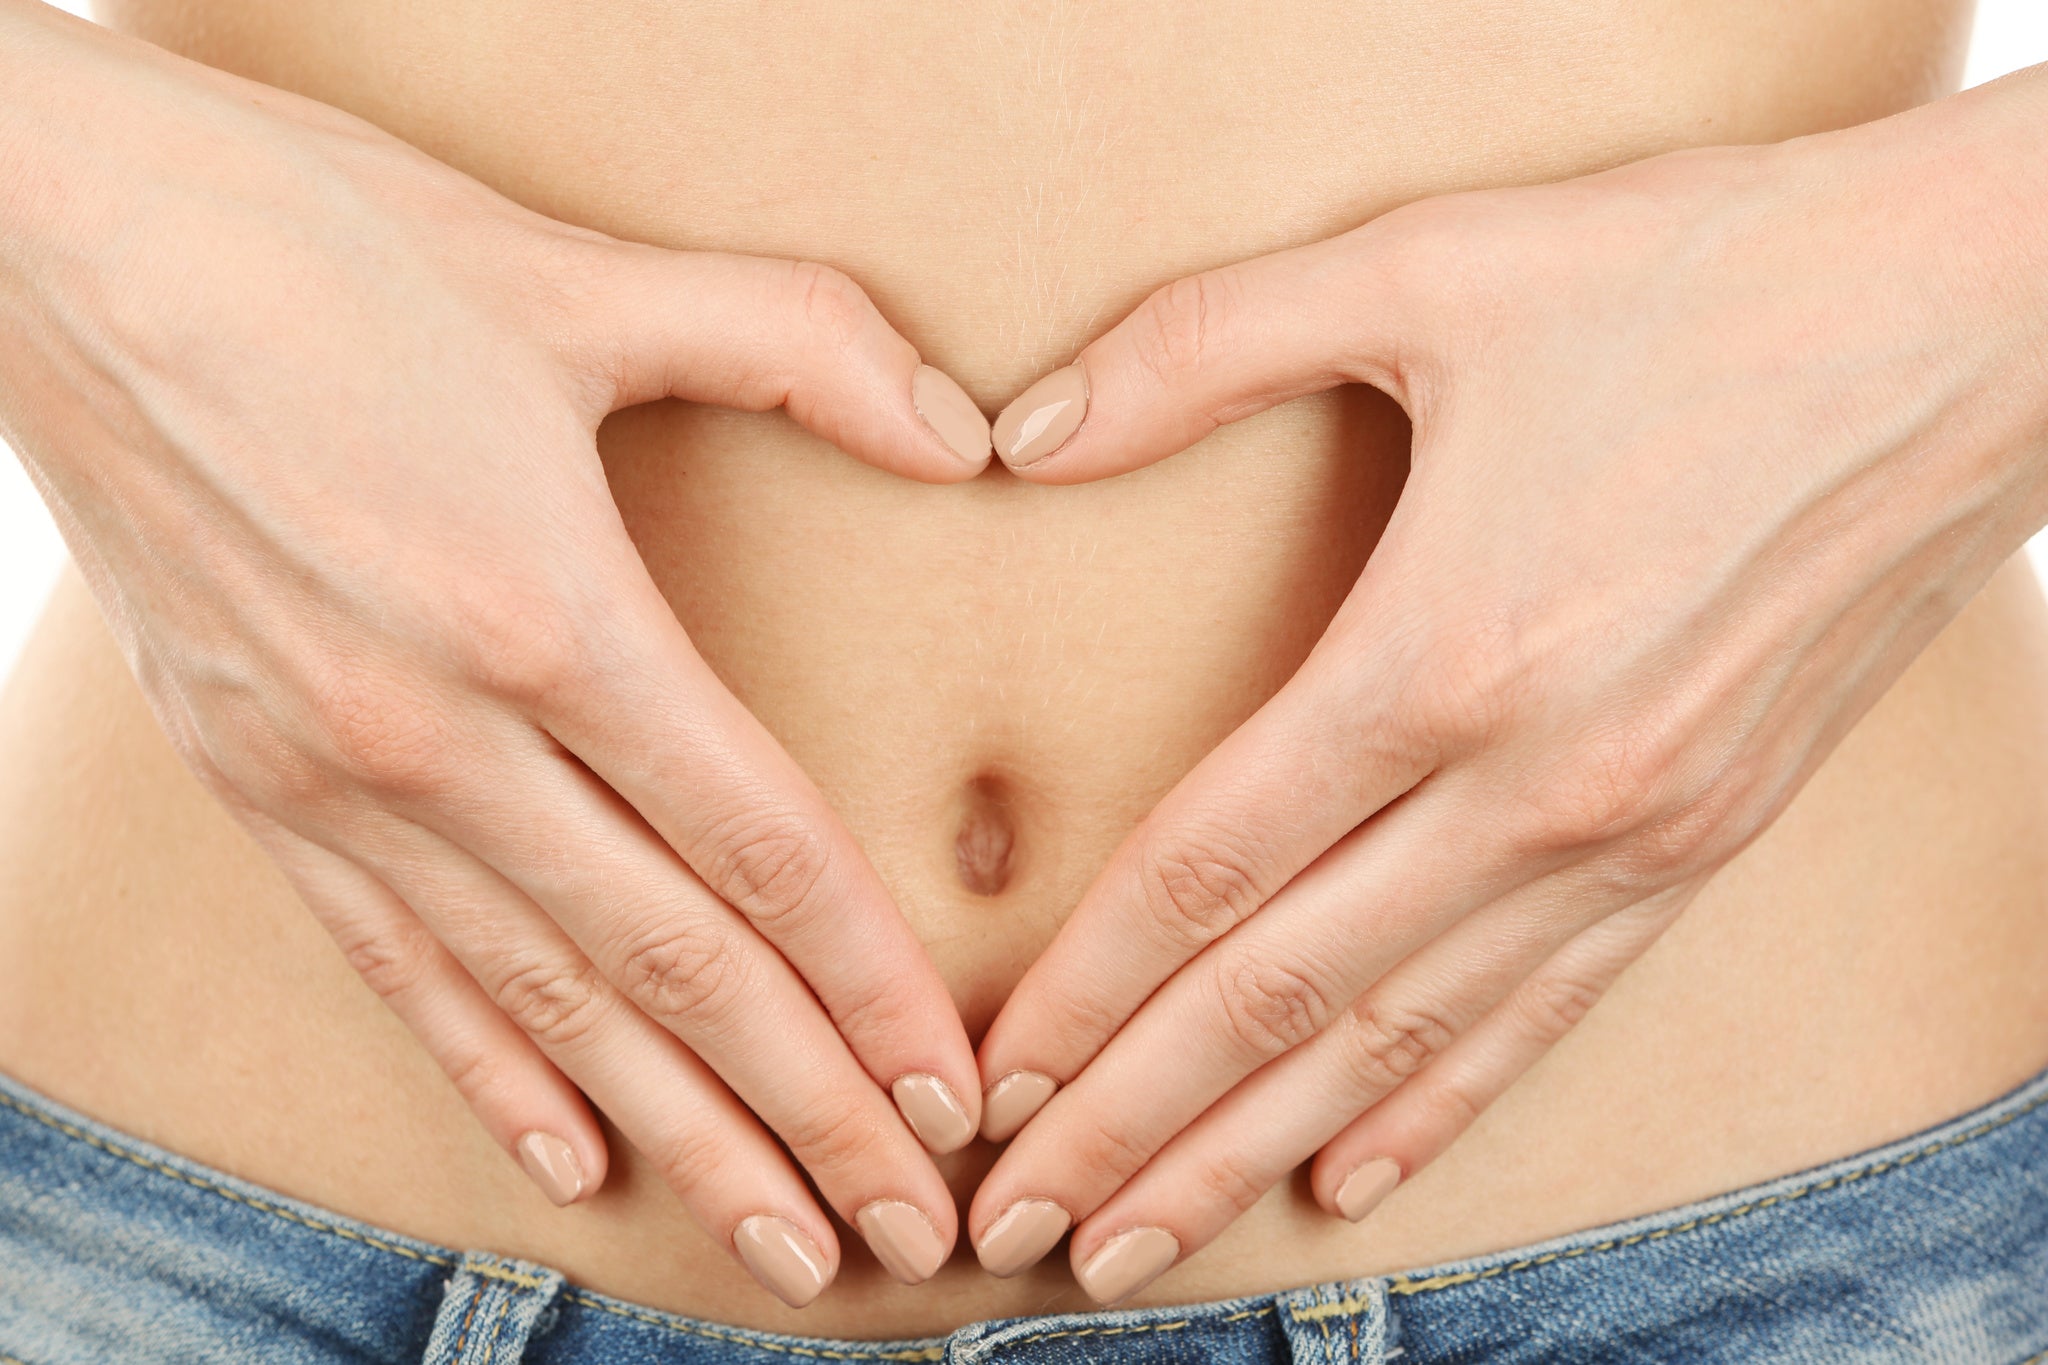 Managing Gas, Bloating and Indigestion